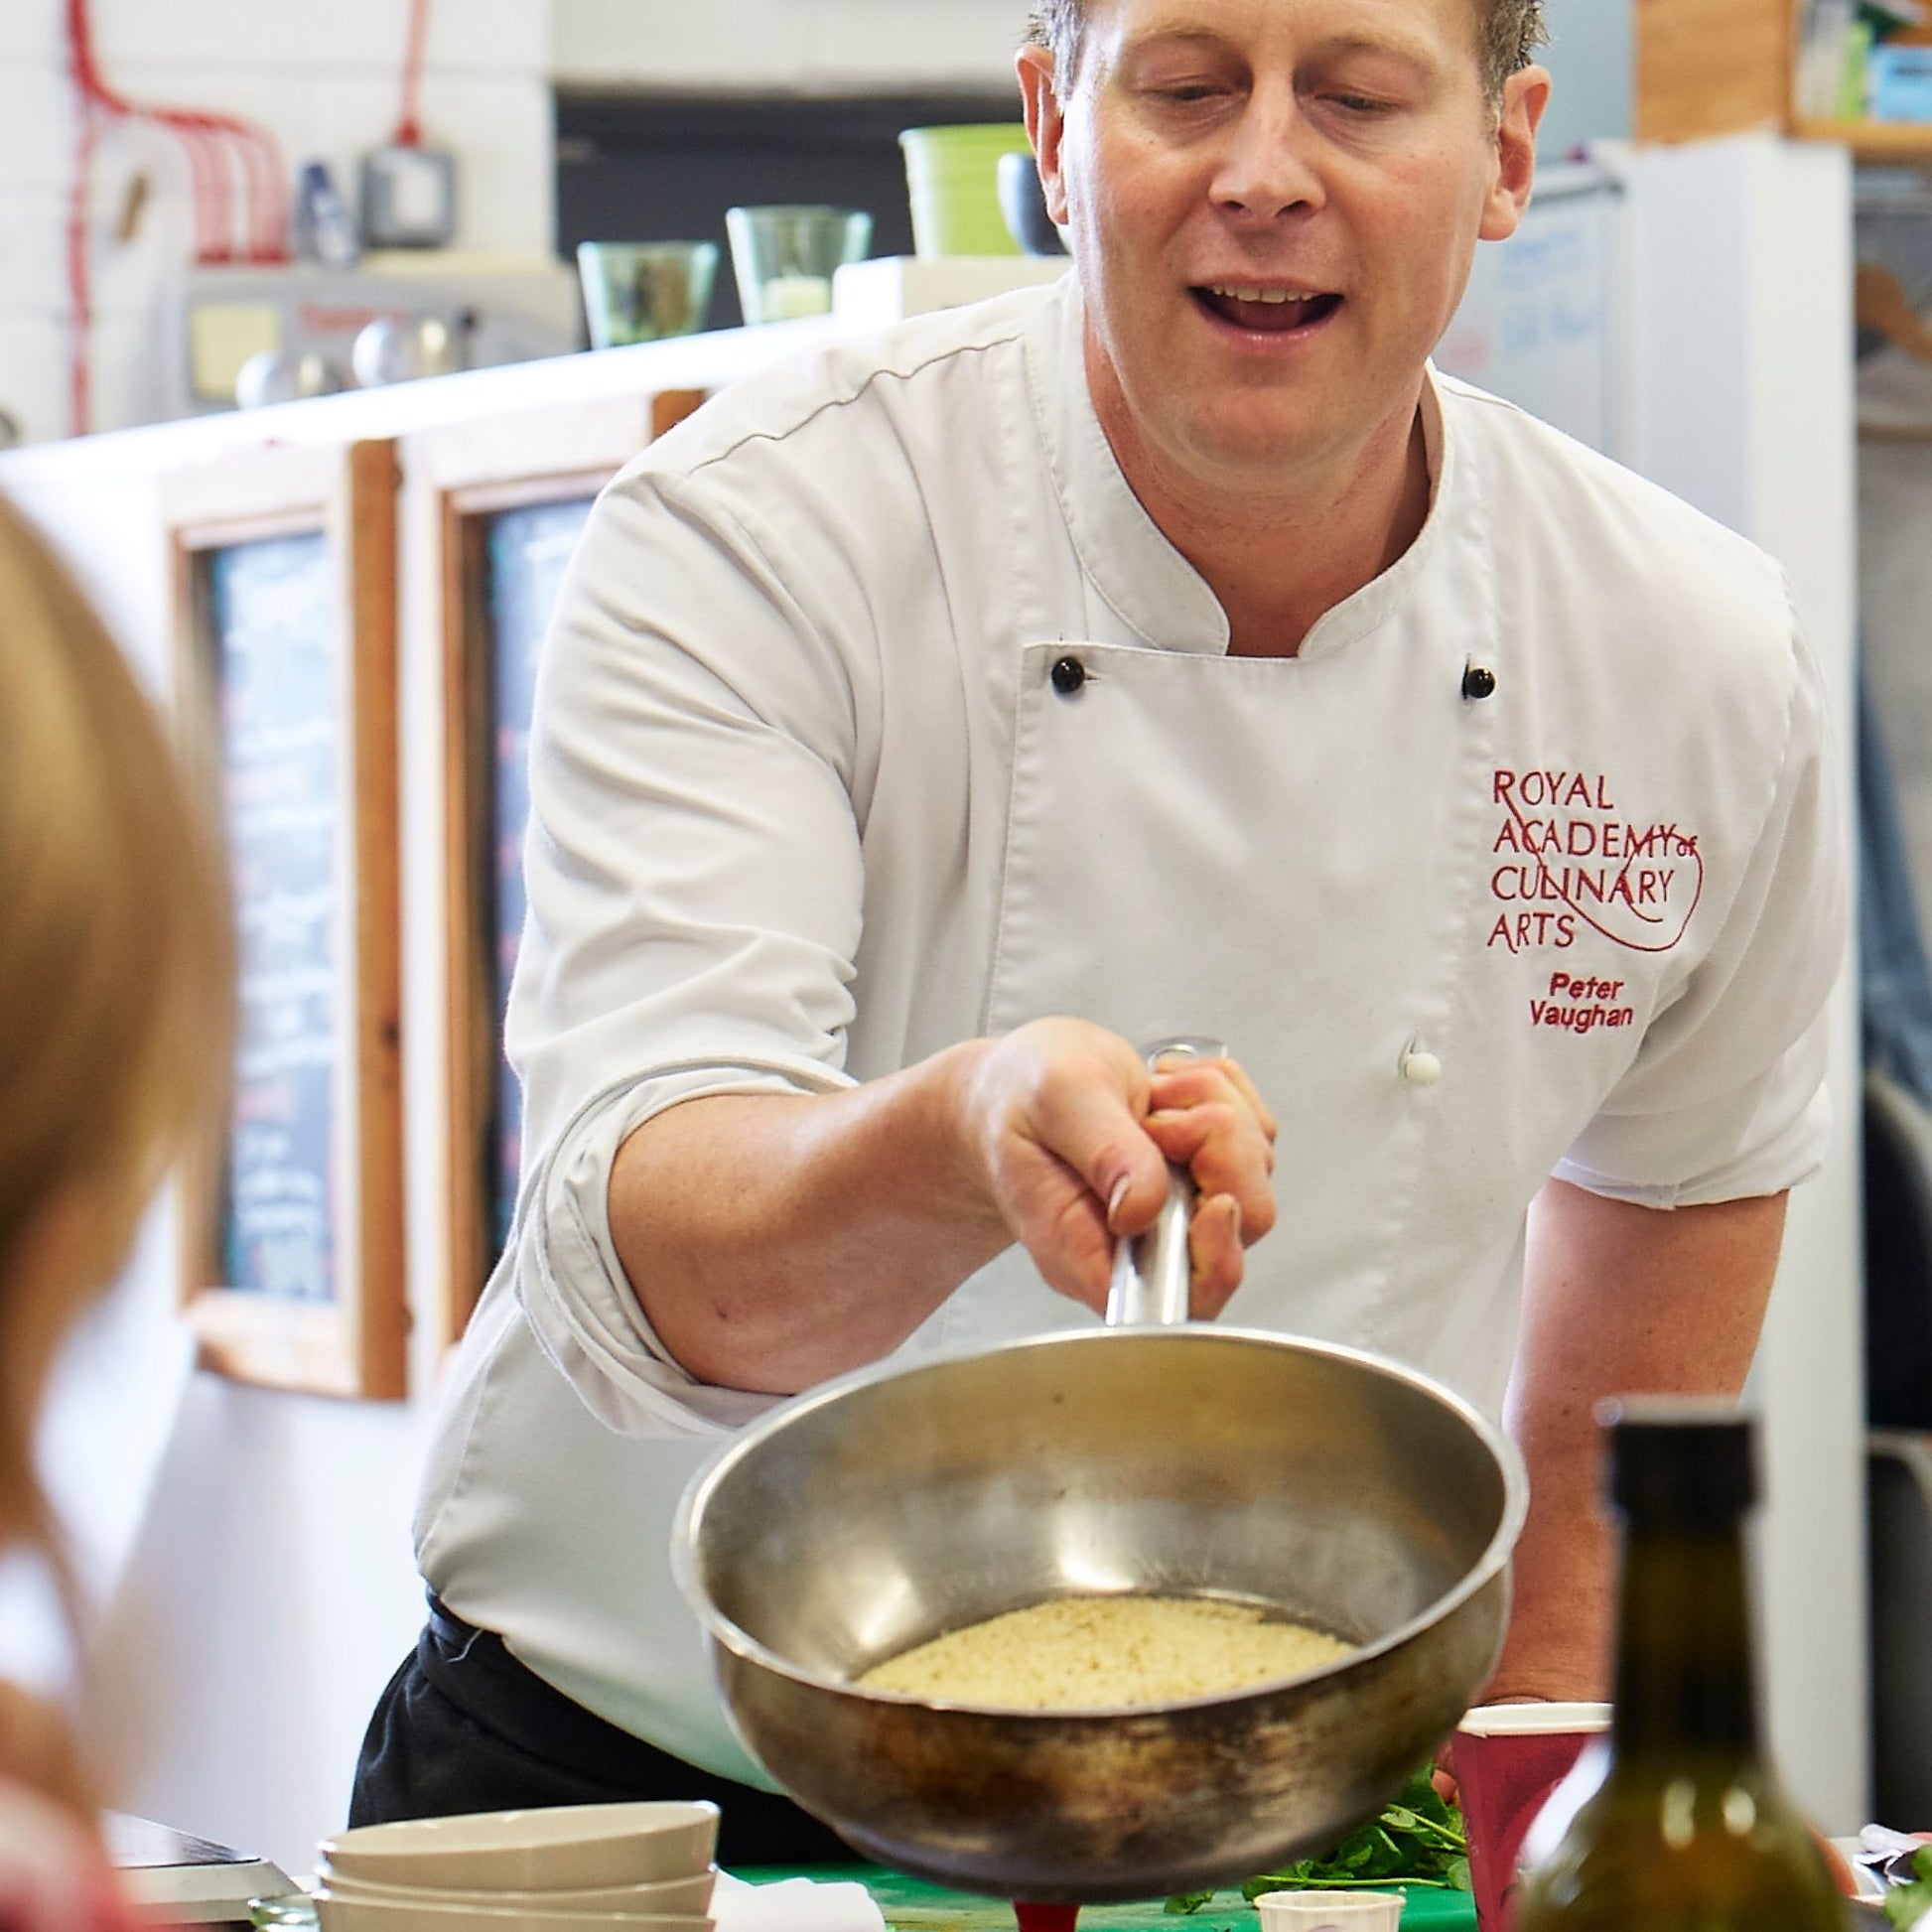 Chef Peter Vaughan making Moroccan cous cous & showing a pan to students